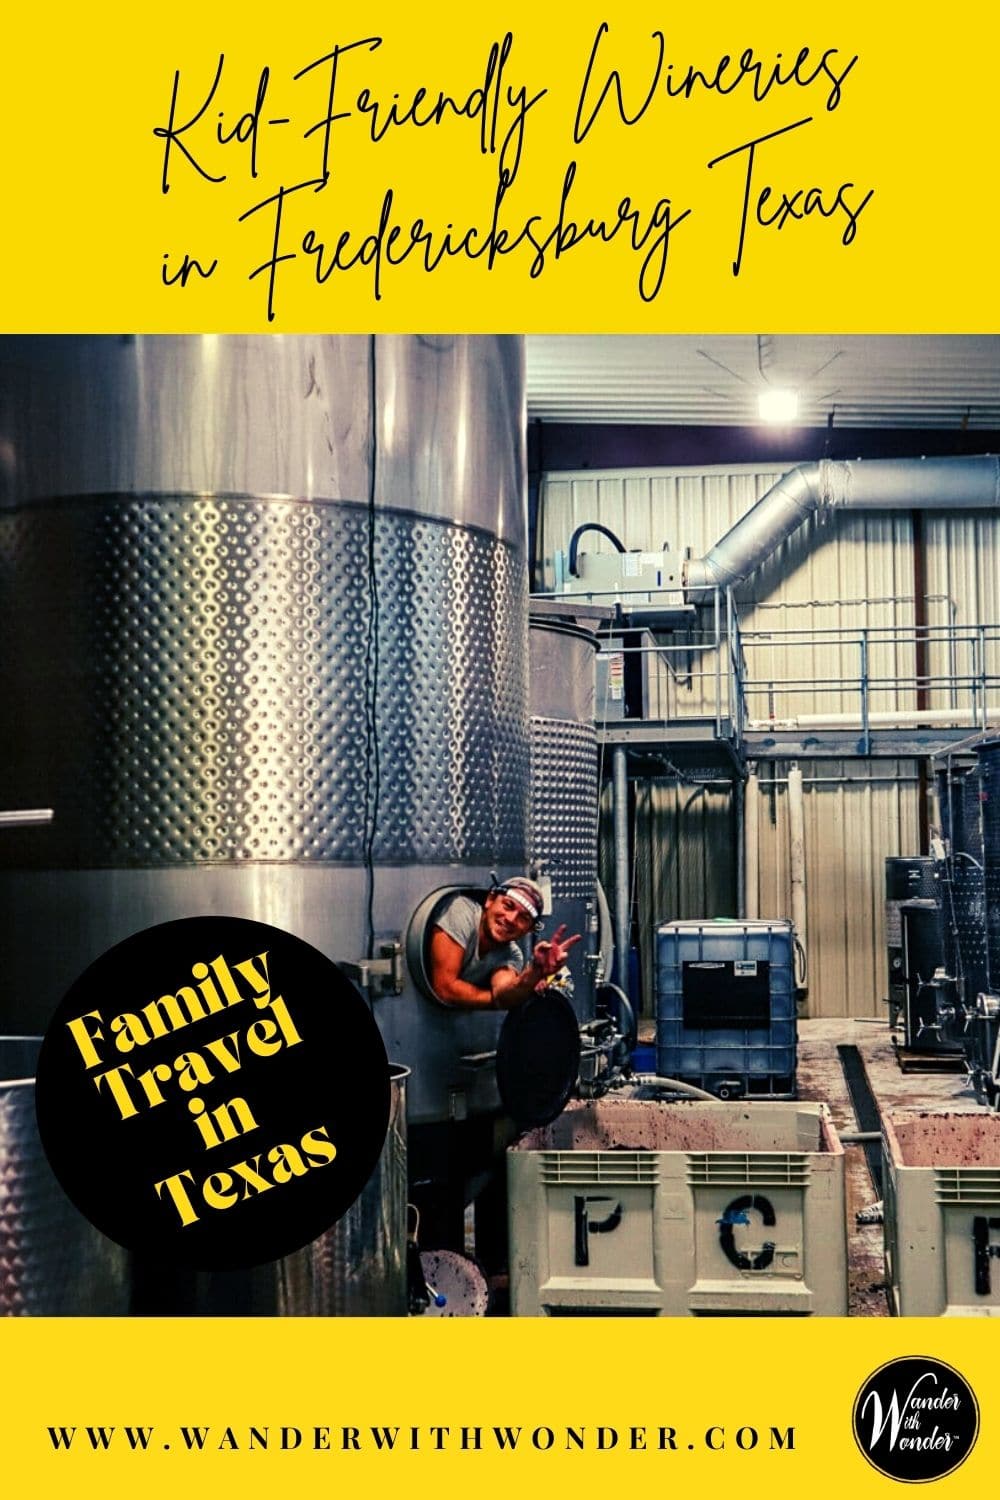 Think kids and wineries don't go together? You haven't been to Fredericksburg! Here are 11 kid-friendly wineries in Fredericksburg Texas.